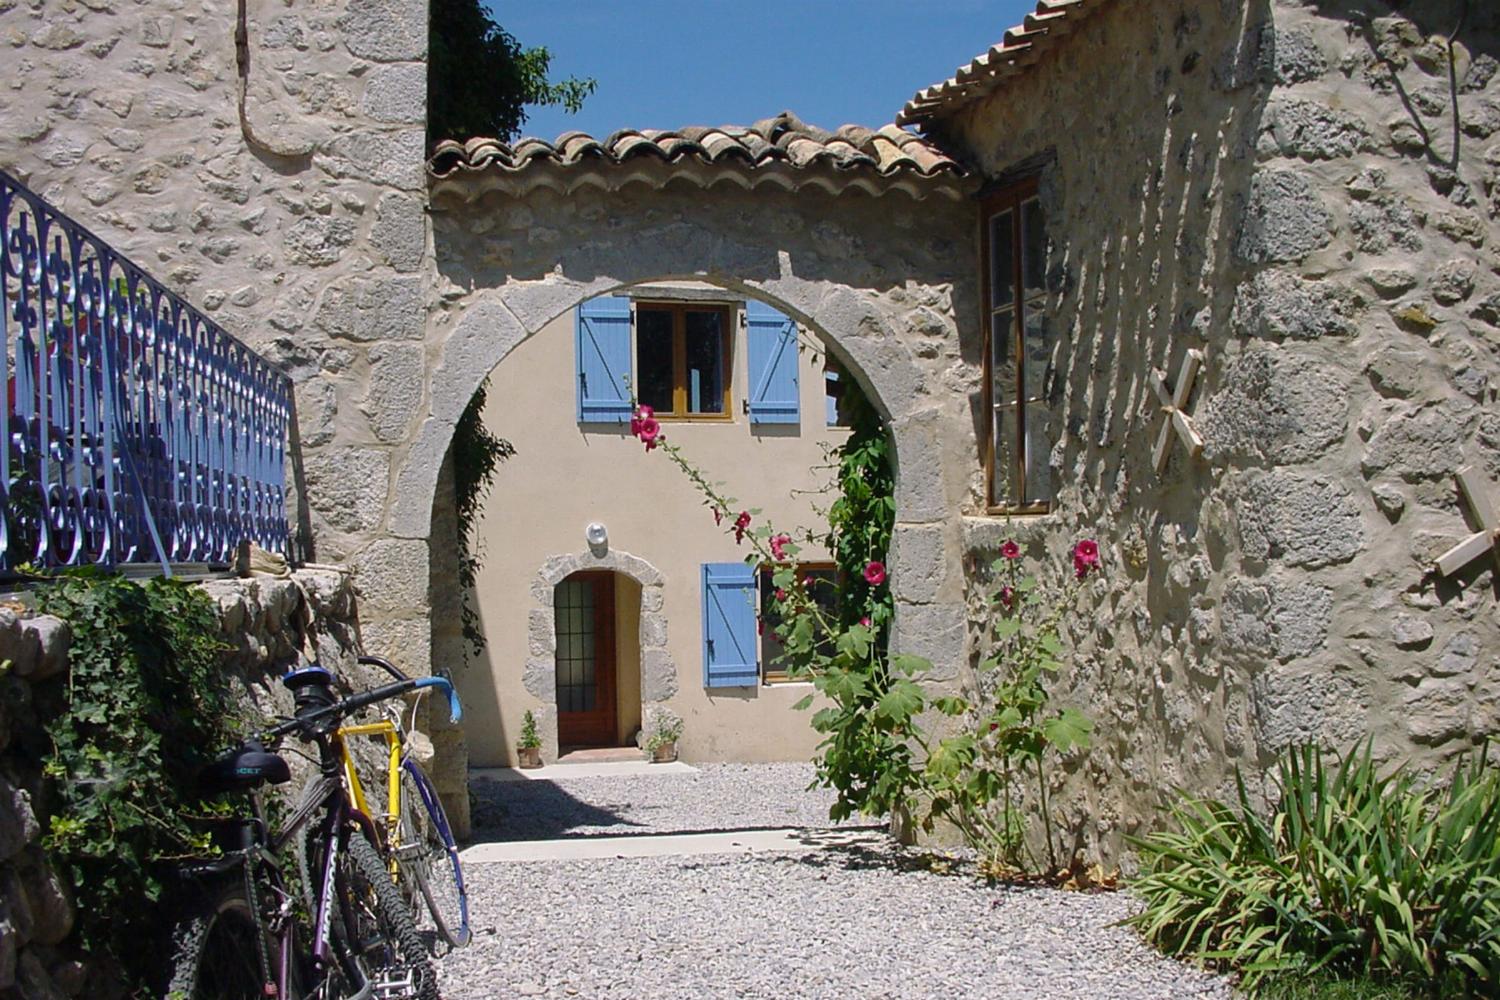 Holiday accommodation in Provence